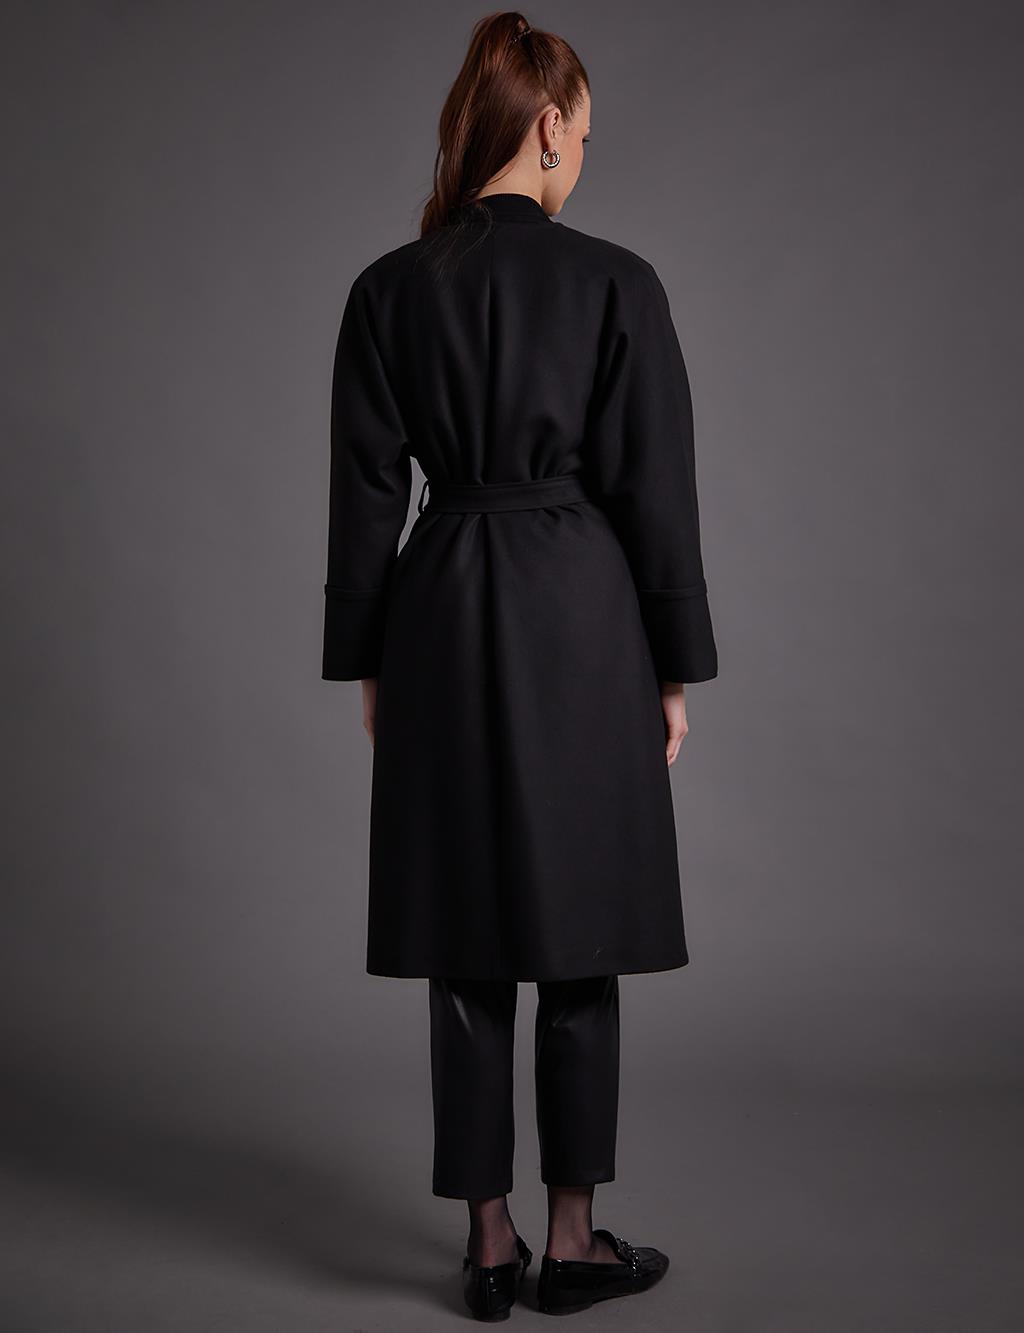 Japanese Sleeve Coat Black with Stone Embroidery on the Collar